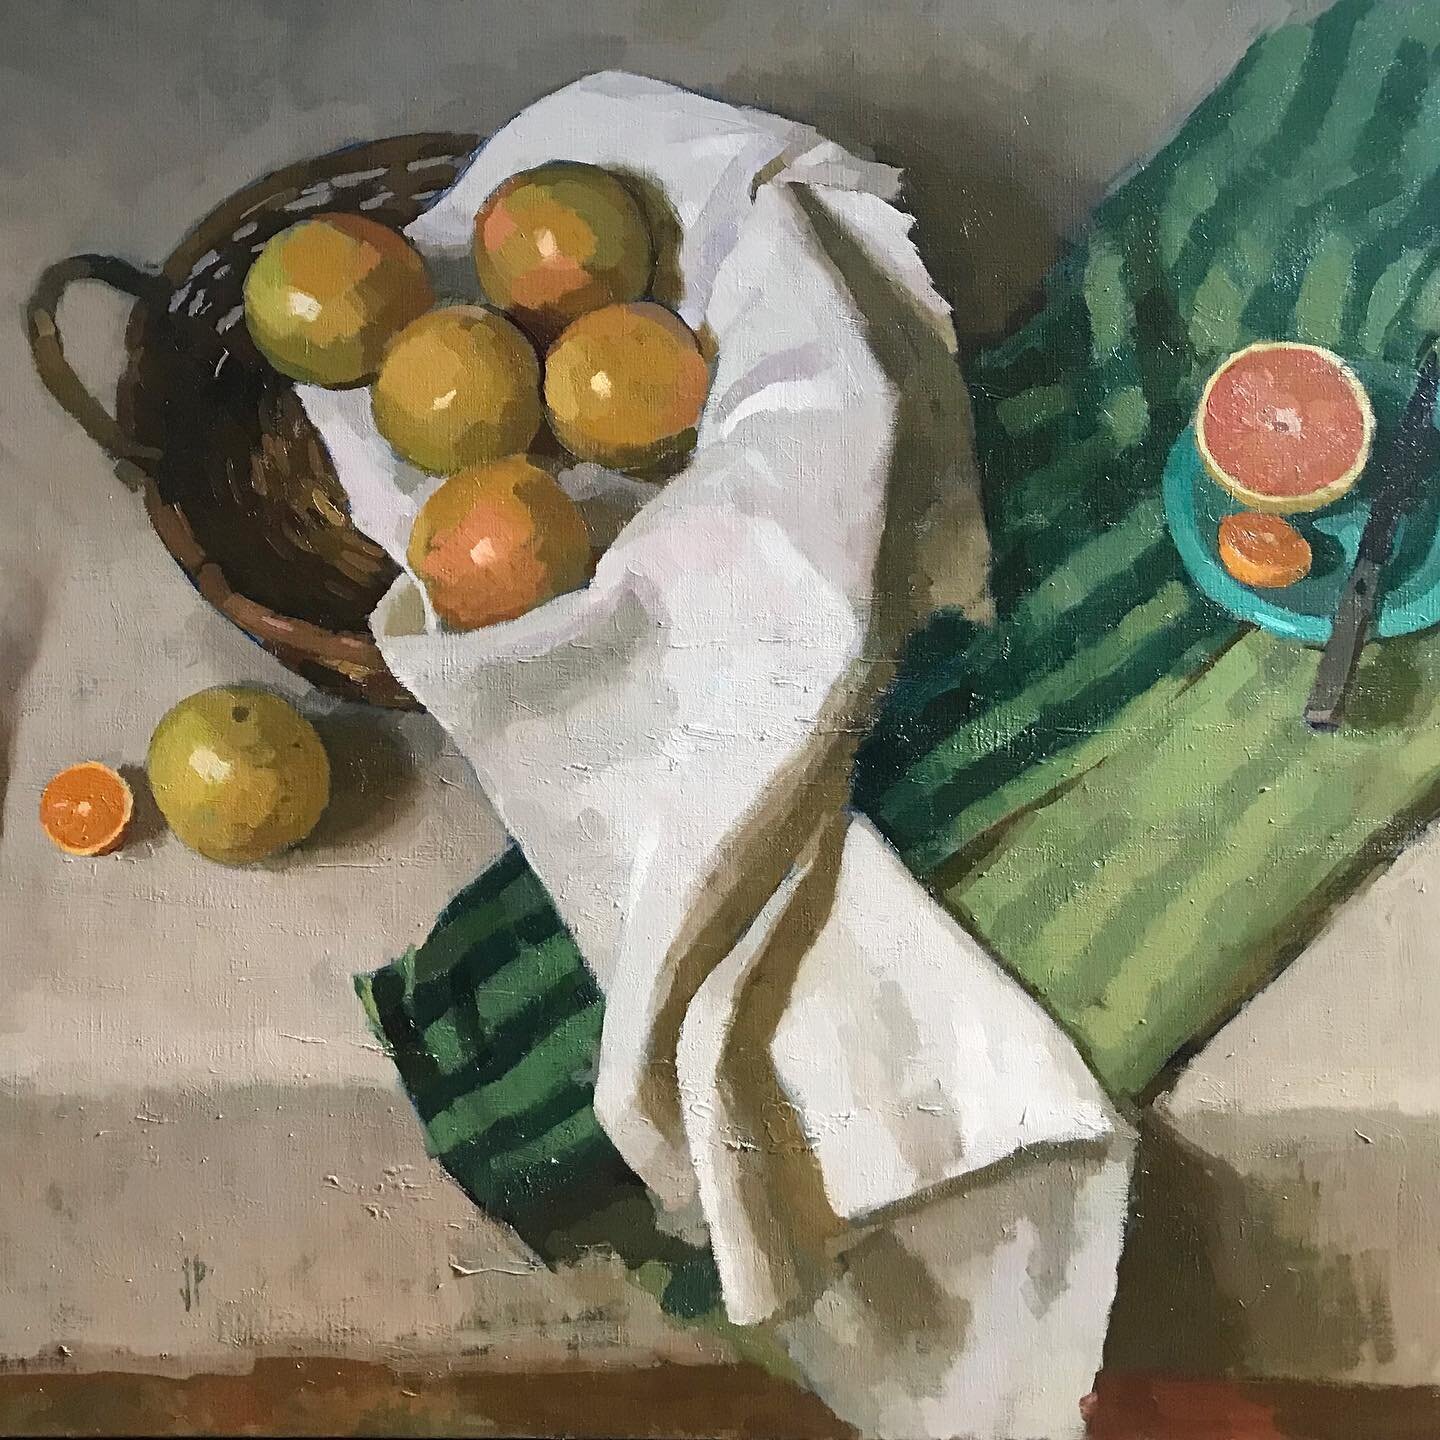 A look at &lsquo;Grapefruit&rsquo; for Jussi&rsquo;s upcoming solo show in October. I love Jussi&rsquo;s color choices and compositions.

#stilllife #grapefruit #jussip&ouml;yh&ouml;nen